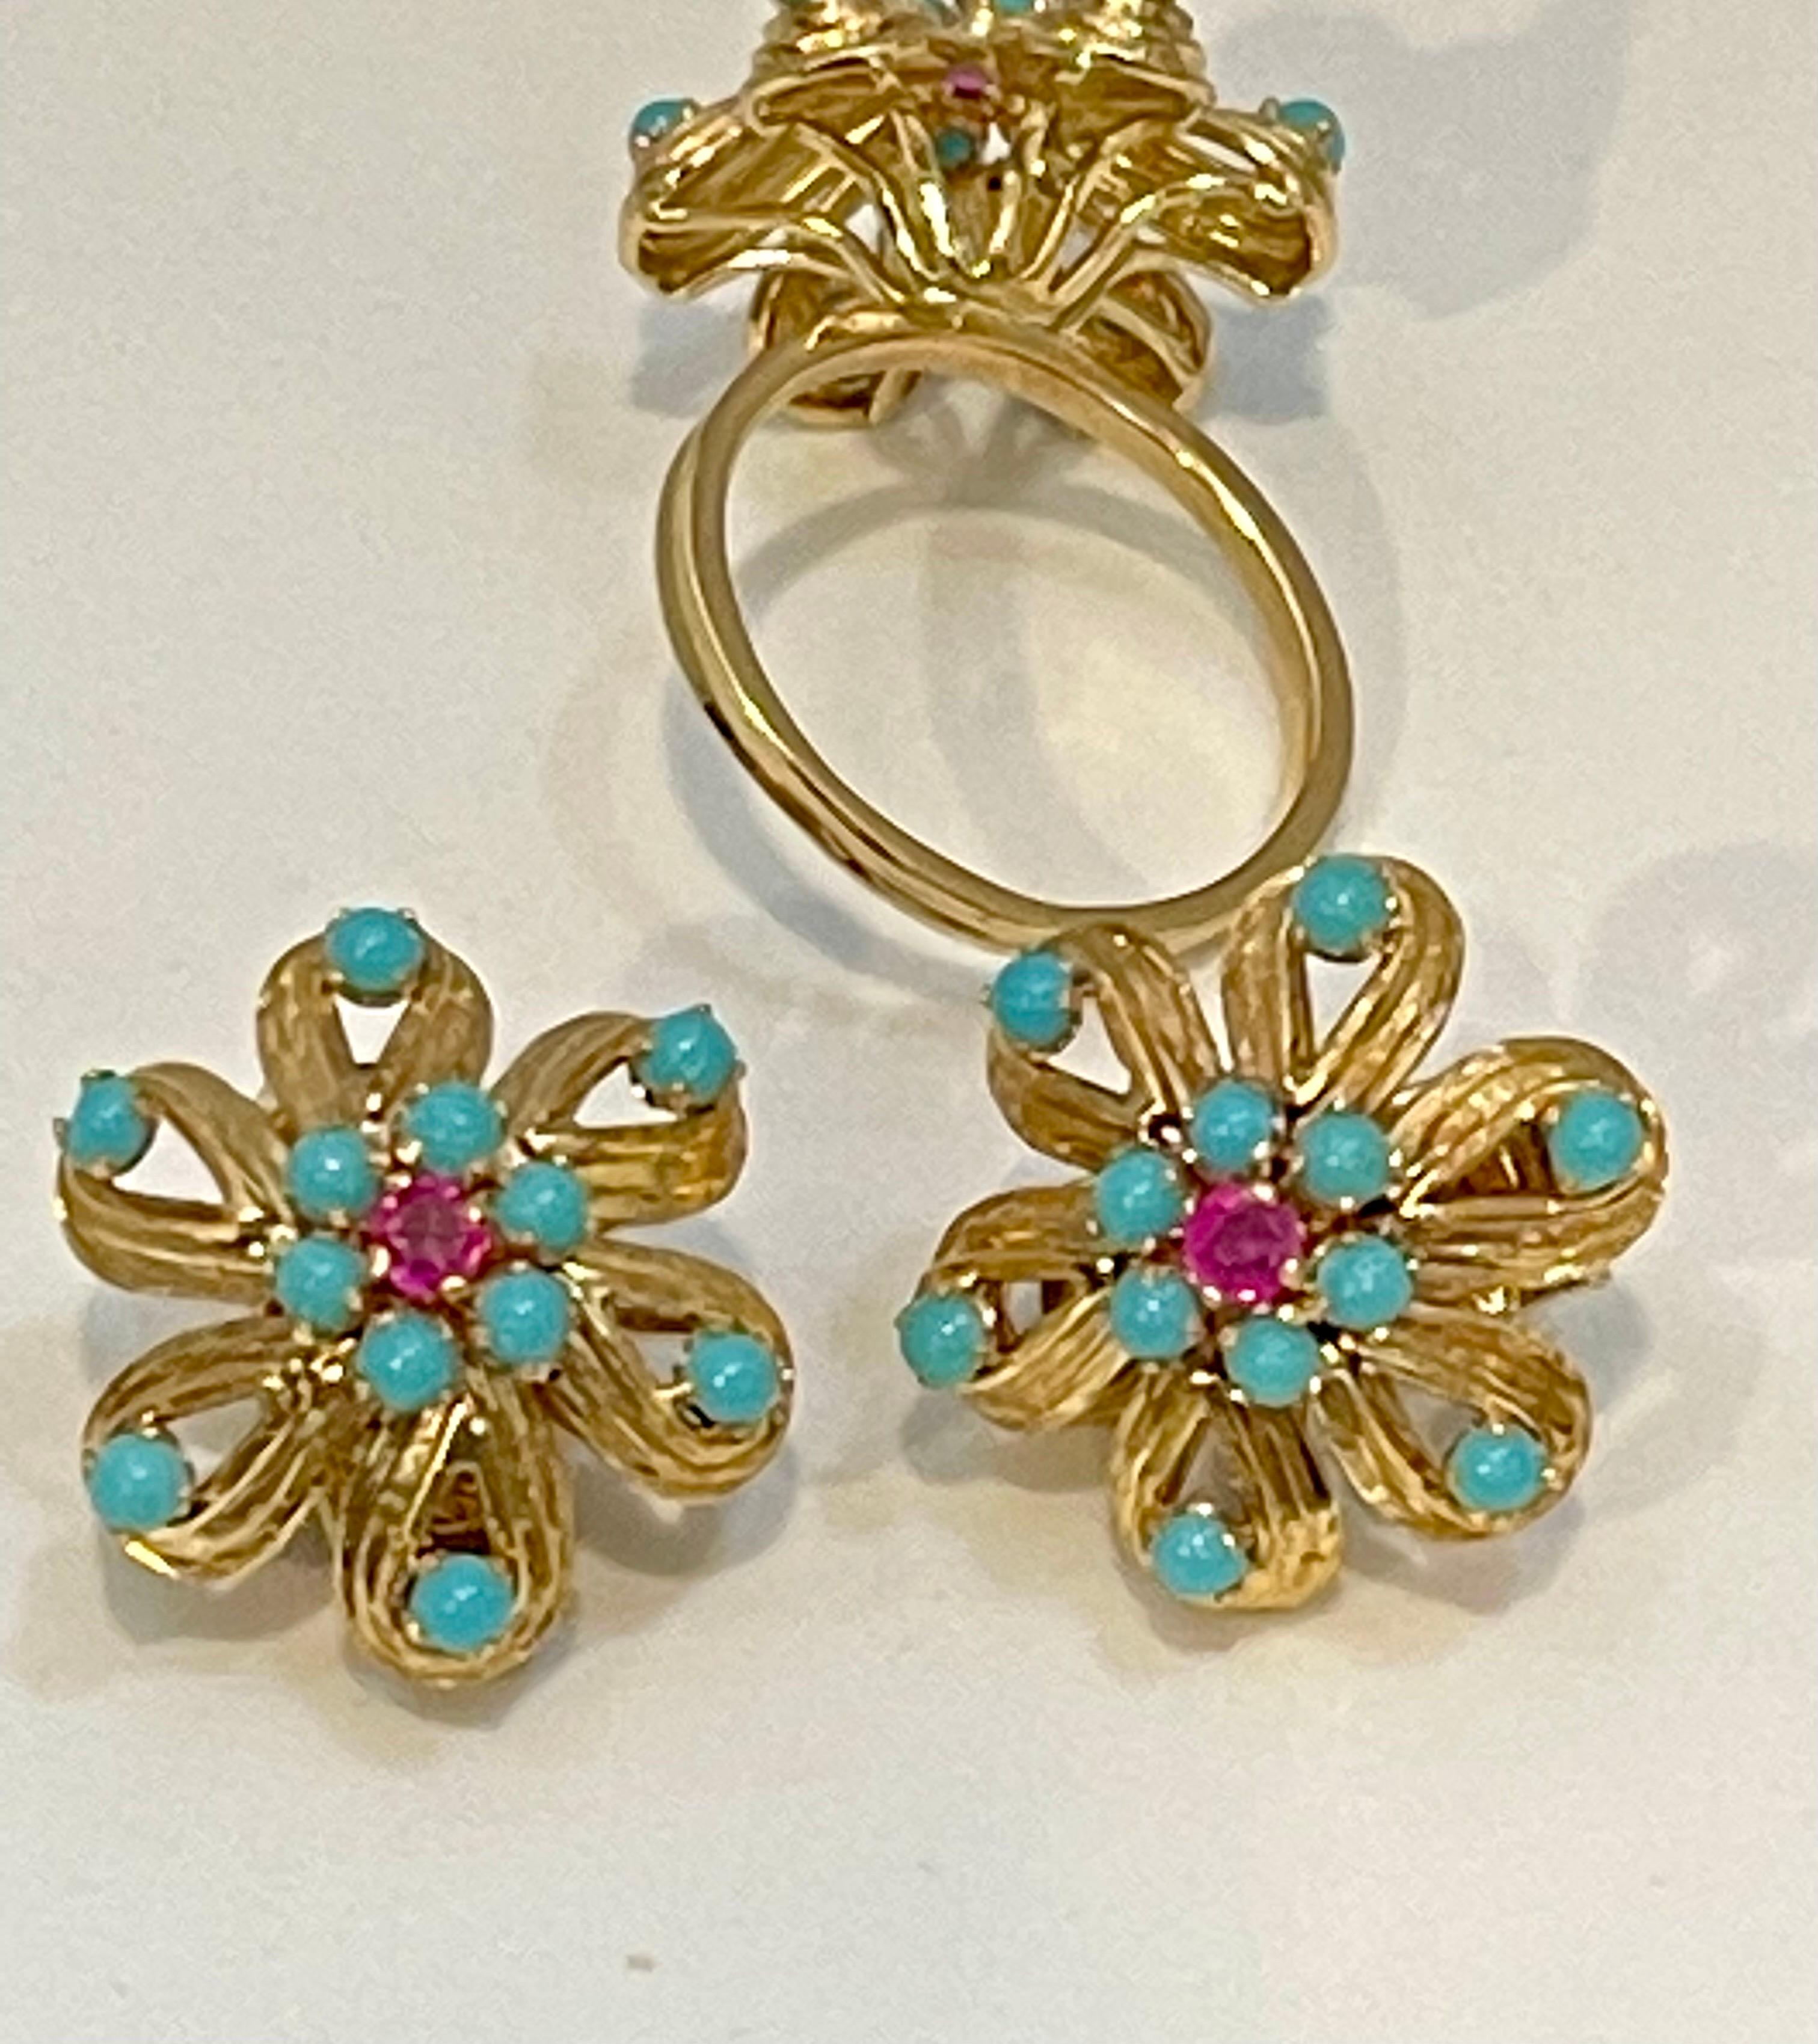 Women's 4 Ct Natural Turquoise & Ruby 18 Kt Yellow Gold Flower Ring & Earring Set 20Gm For Sale